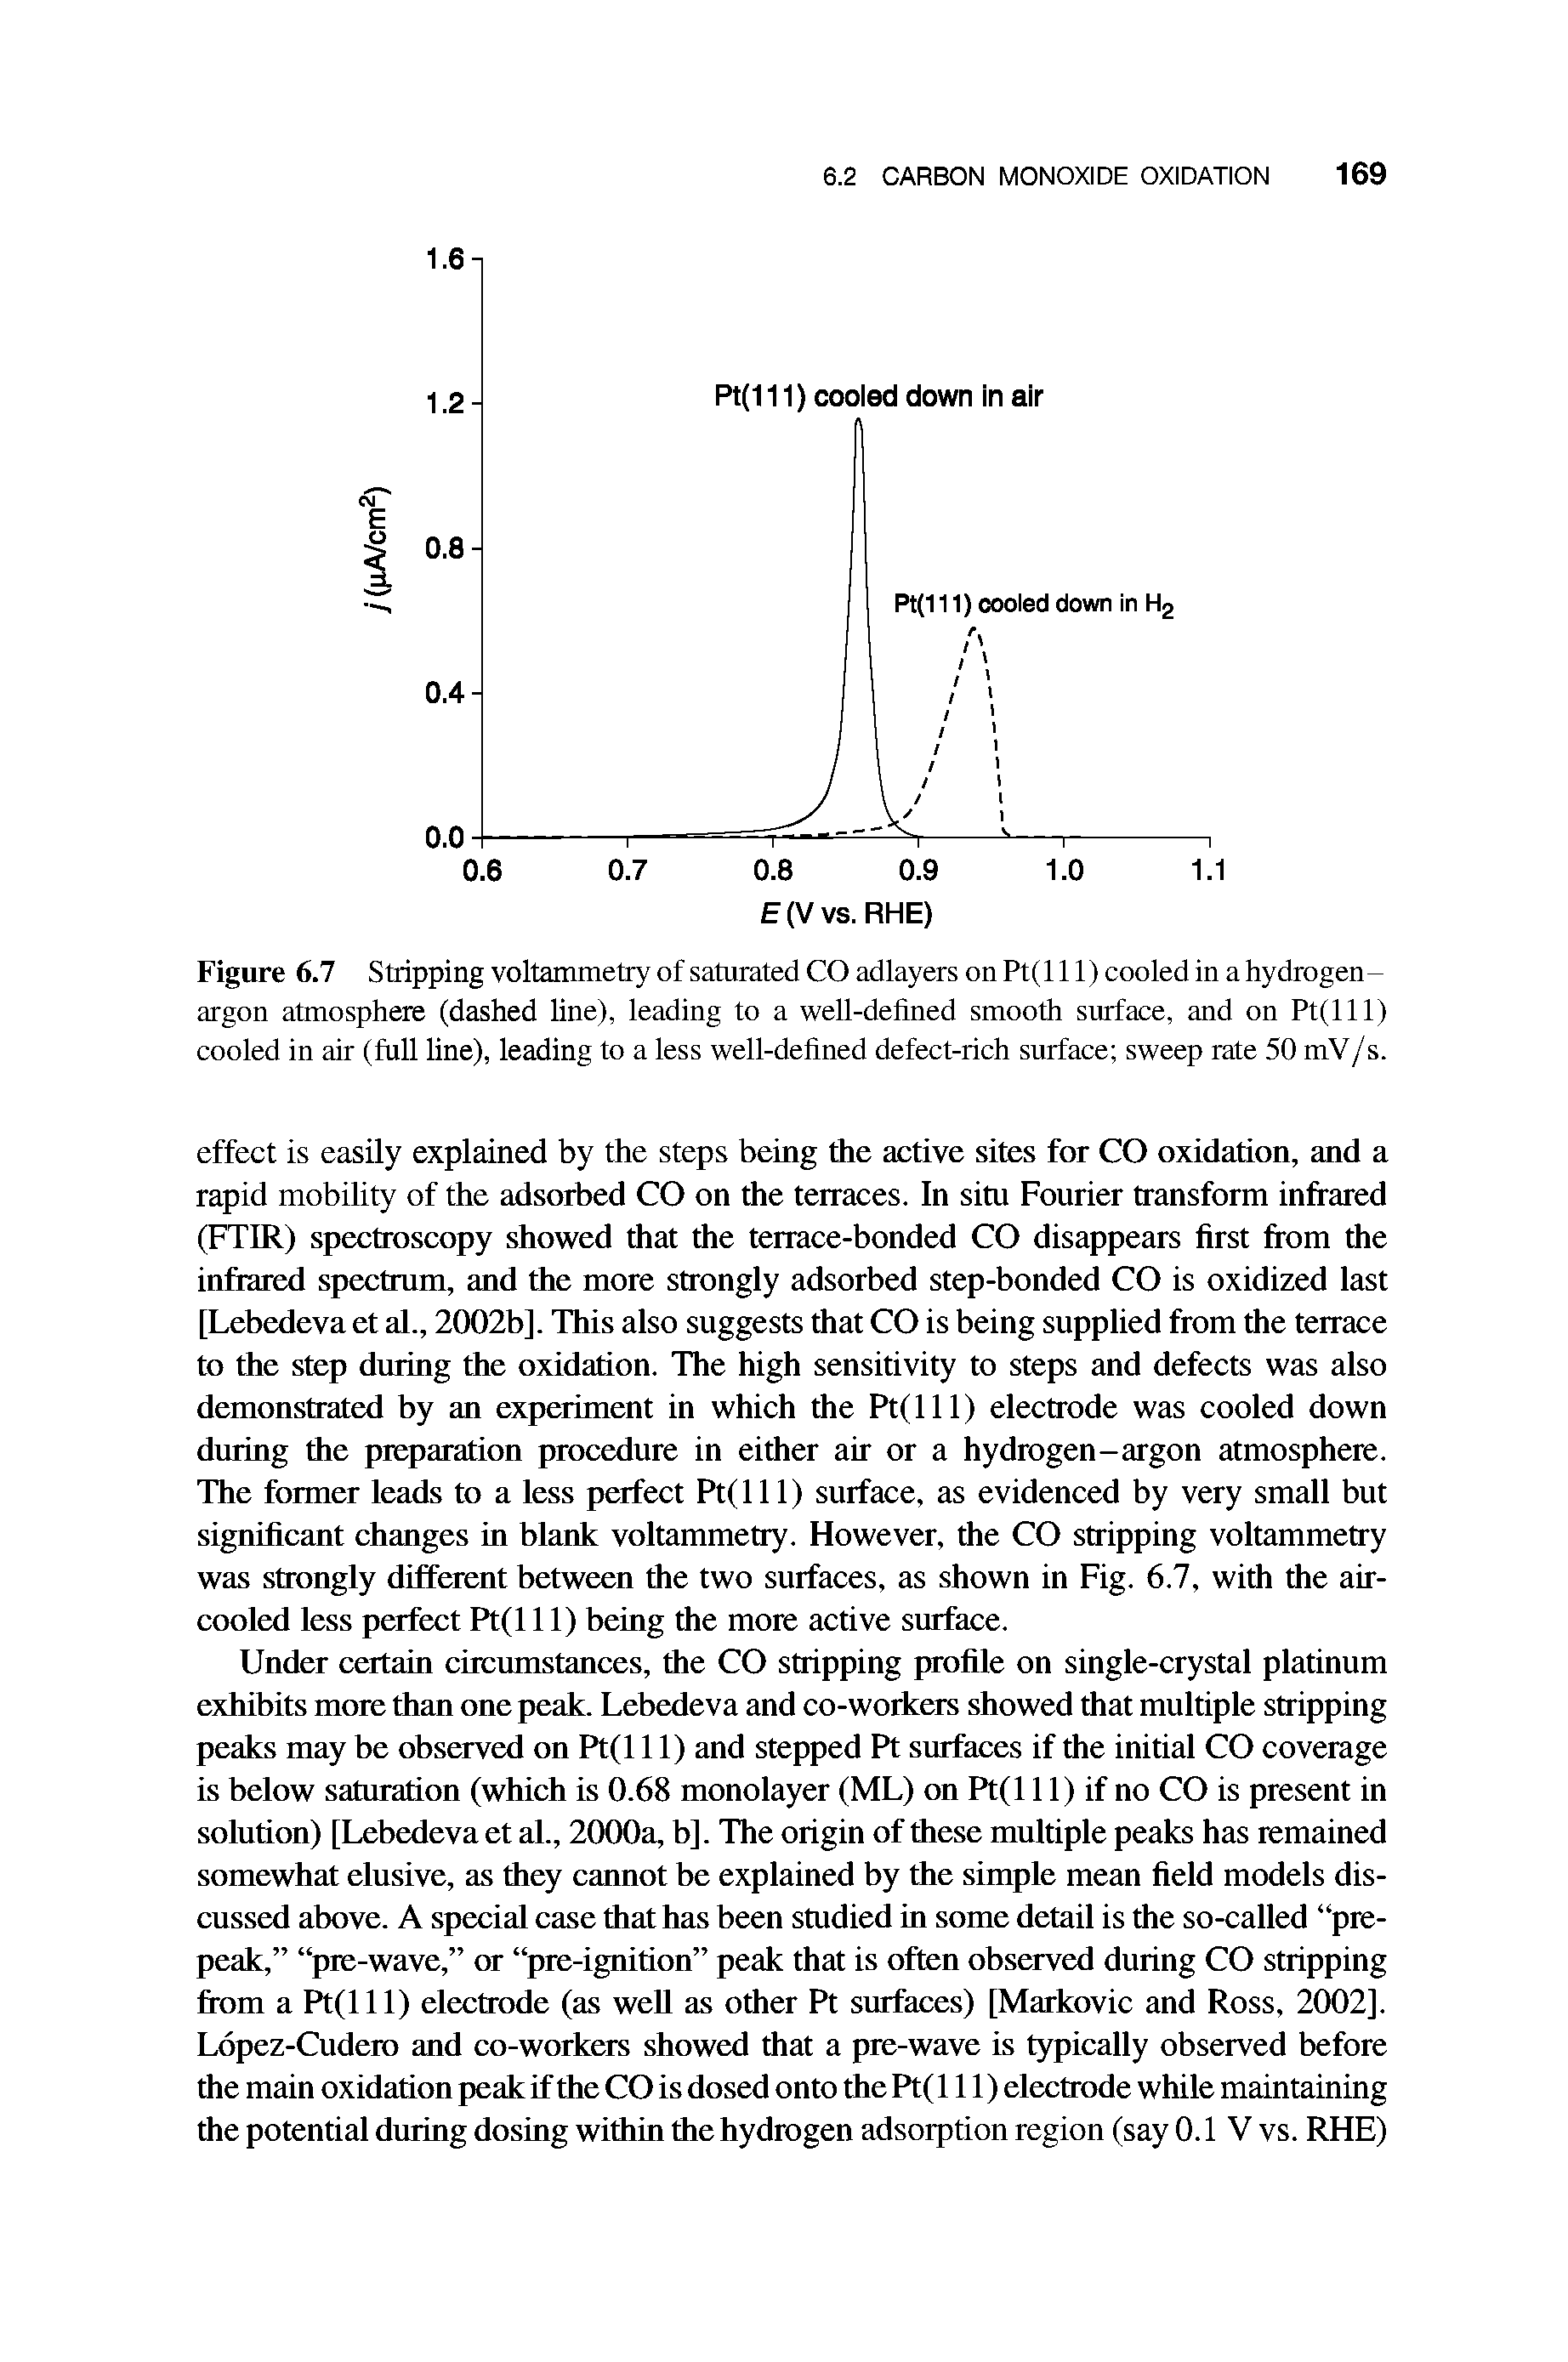 Figure 6.7 Stripping voltammetry of saturated CO adlayers on Pt(l 11) cooled in a hydrogen-argon atmosphere (dashed line), leading to a well-defined smooth surface, and on Pt(lll) cooled in air (full line), leading to a less well-defined defect-rich surface sweep rate 50 mV/s.